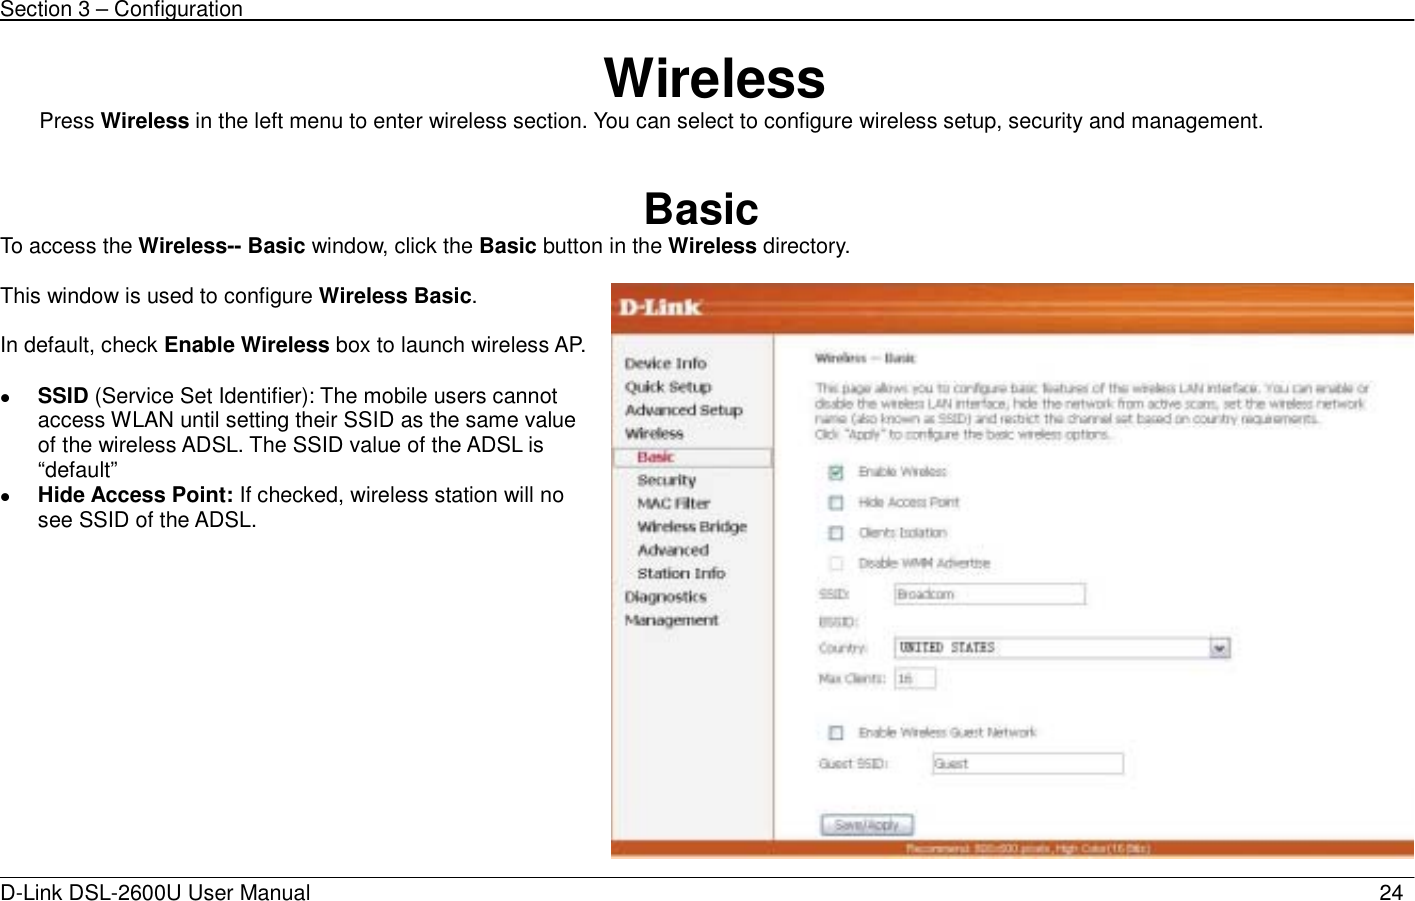 Section 3 – Configuration   D-Link DSL-2600U User Manual                            24 Wireless Press Wireless in the left menu to enter wireless section. You can select to configure wireless setup, security and management.   Basic To access the Wireless-- Basic window, click the Basic button in the Wireless directory.  This window is used to configure Wireless Basic.  In default, check Enable Wireless box to launch wireless AP. z SSID (Service Set Identifier): The mobile users cannot access WLAN until setting their SSID as the same value of the wireless ADSL. The SSID value of the ADSL is “default” z Hide Access Point: If checked, wireless station will no see SSID of the ADSL.  